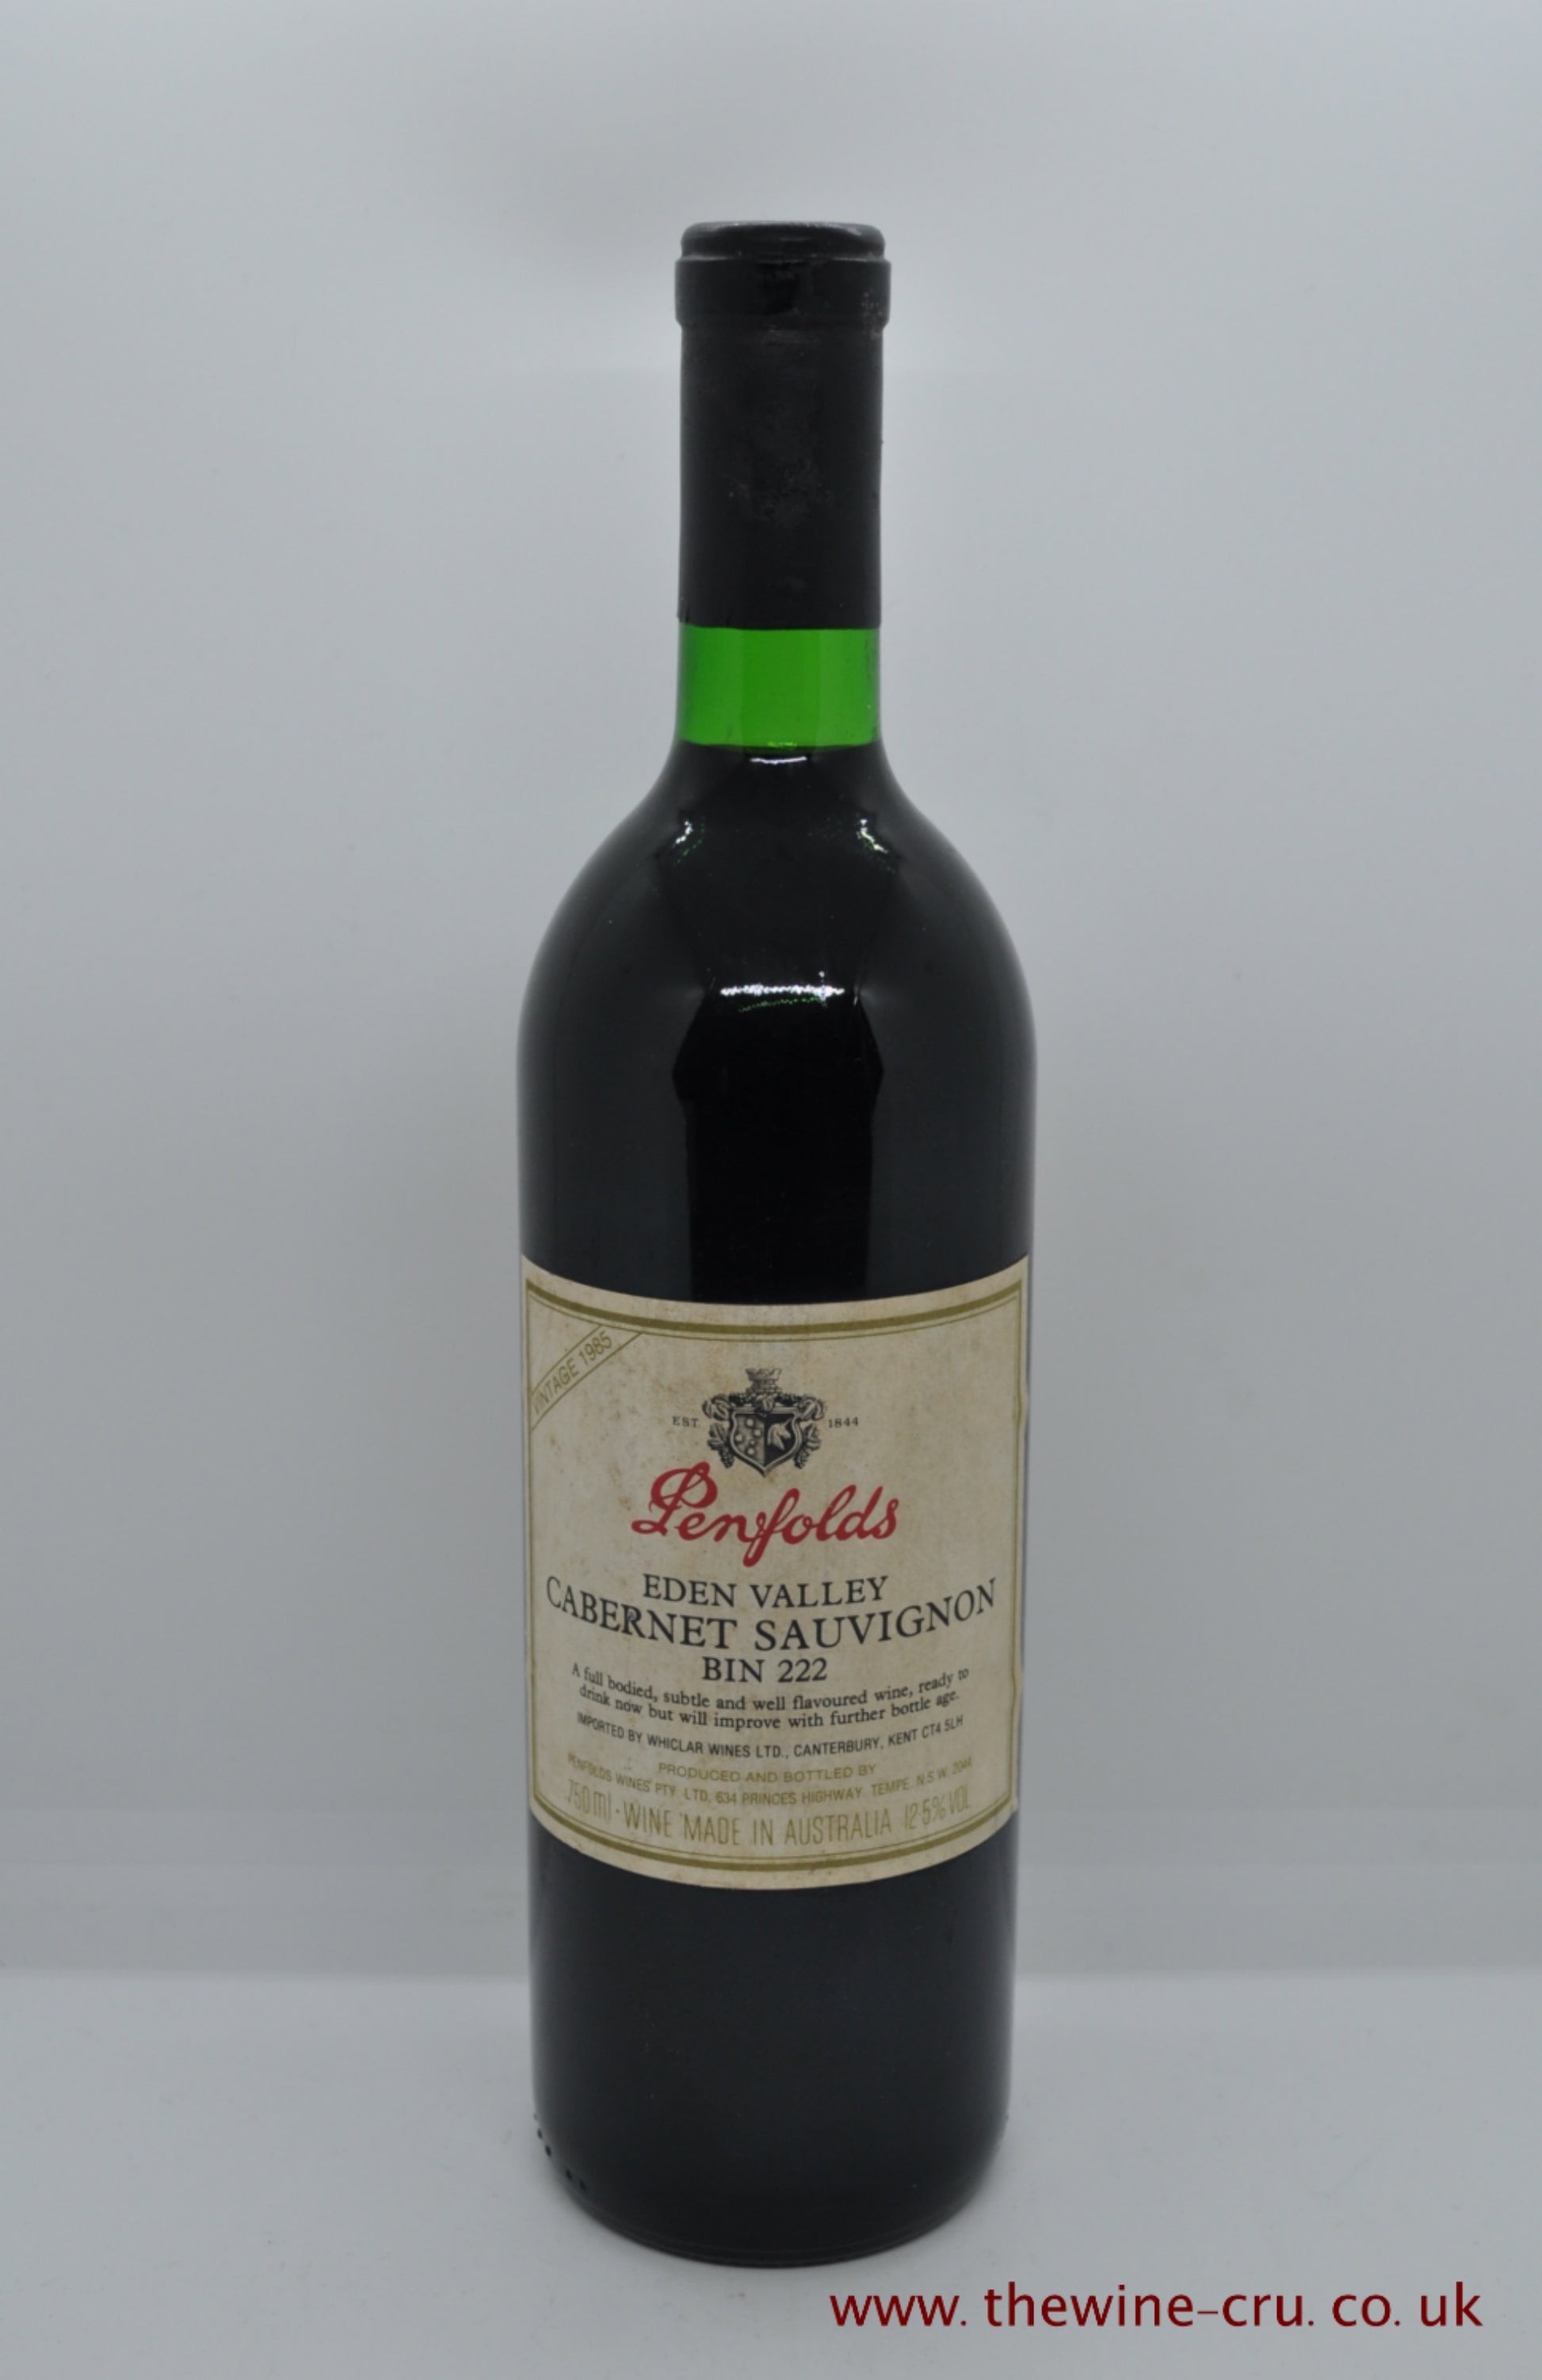 1985 vintage red wine. Penfolds Bin 222 Eden Valley Cabernet Sauvignon 1985. Australia. Immediate delivery. Free local delivery. Gift wrapping available.